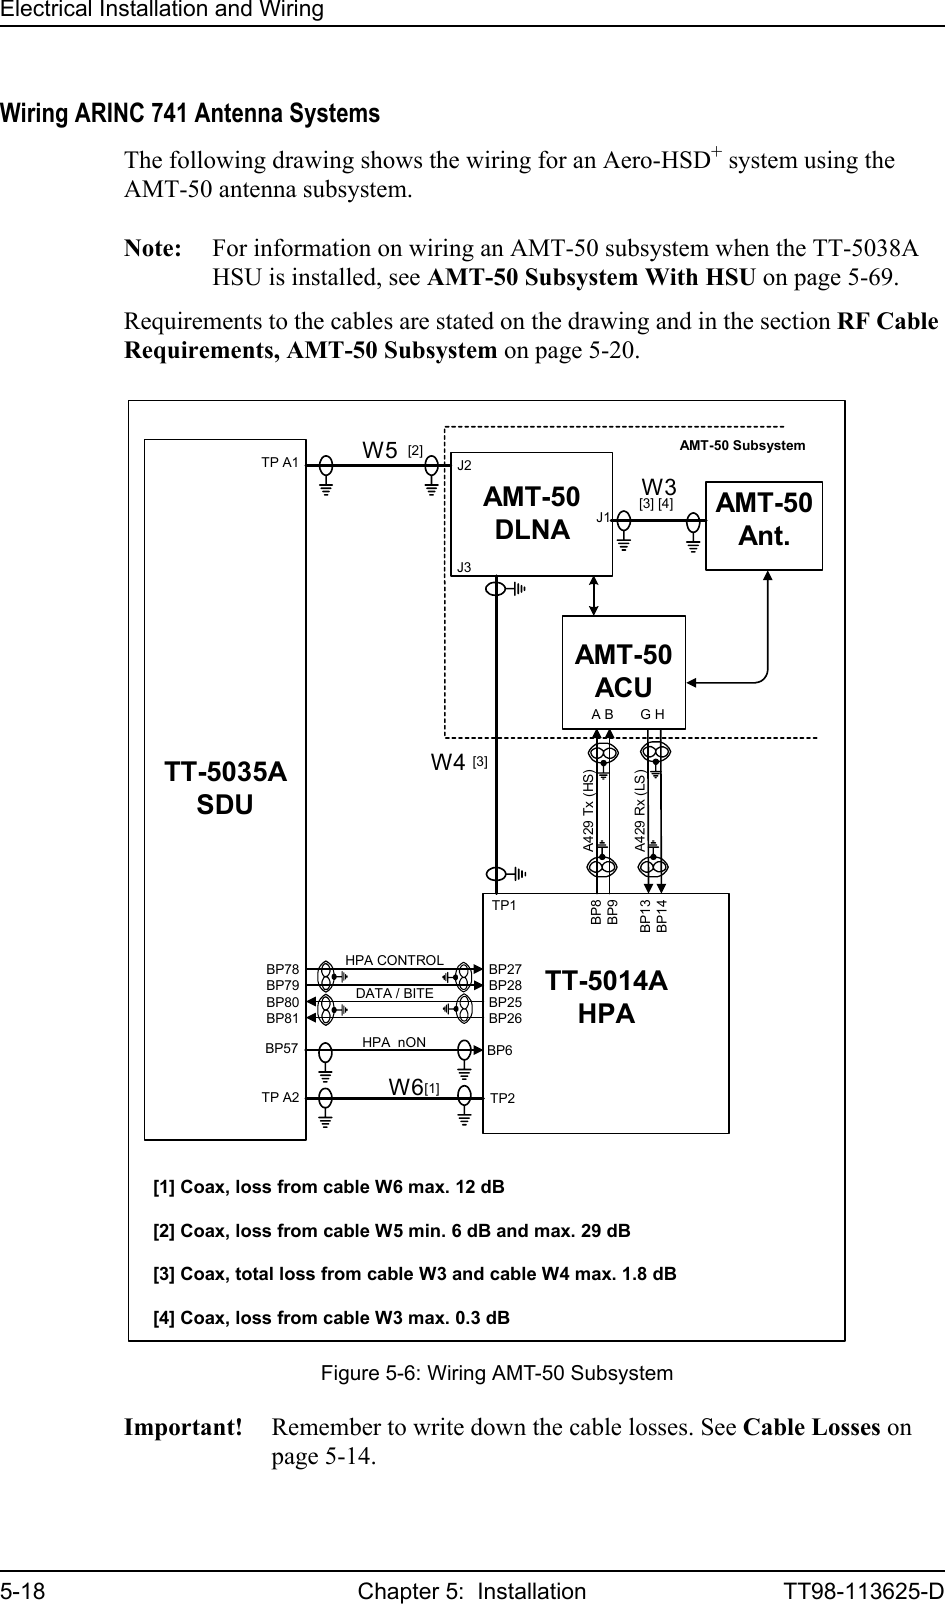 Electrical Installation and Wiring5-18 Chapter 5:  Installation TT98-113625-DWiring ARINC 741 Antenna SystemsThe following drawing shows the wiring for an Aero-HSD+ system using the AMT-50 antenna subsystem.Note: For information on wiring an AMT-50 subsystem when the TT-5038A HSU is installed, see AMT-50 Subsystem With HSU on page 5-69.Requirements to the cables are stated on the drawing and in the section RF Cable Requirements, AMT-50 Subsystem on page 5-20.Important! Remember to write down the cable losses. See Cable Losses on page 5-14.Figure 5-6: Wiring AMT-50 SubsystemTT-5035ASDUBP78BP79BP80BP81TP A2HPA  nONBP57 BP6TP2BP27BP28BP25BP26TP A1TT-5014AHPAHPA CONTROLDATA / BITEBP8BP9BP13BP14AMT-50ACUA B       G HTP1AMT-50DLNAJ3J2J1AMT-50 Subsystem[1] Coax, loss from cable W6 max. 12 dB[2] Coax, loss from cable W5 min. 6 dB and max. 29 dB[3] Coax, total loss from cable W3 and cable W4 max. 1.8 dB[4] Coax, loss from cable W3 max. 0.3 dBW5W6W4AMT-50Ant.W3[1][2][3][3] [4]A429 Tx (HS)A429 Rx (LS)